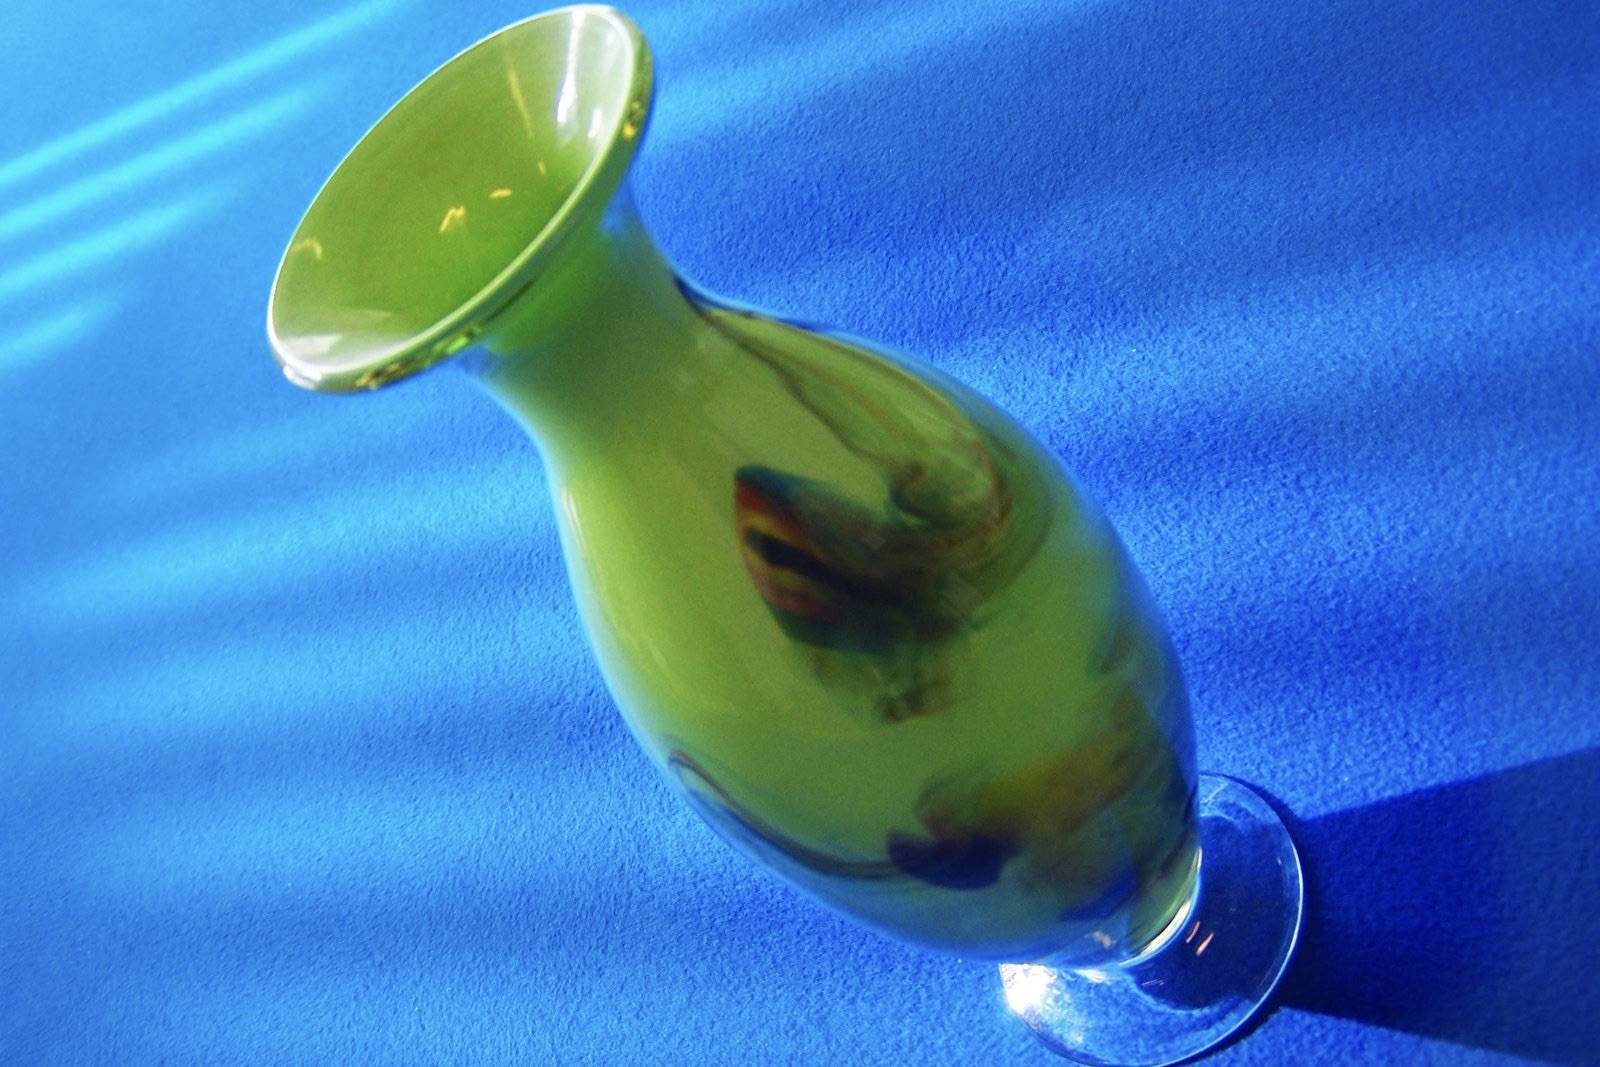 43rd Green River Glass Show and Sale coming to Kent Commons on Feb. 29